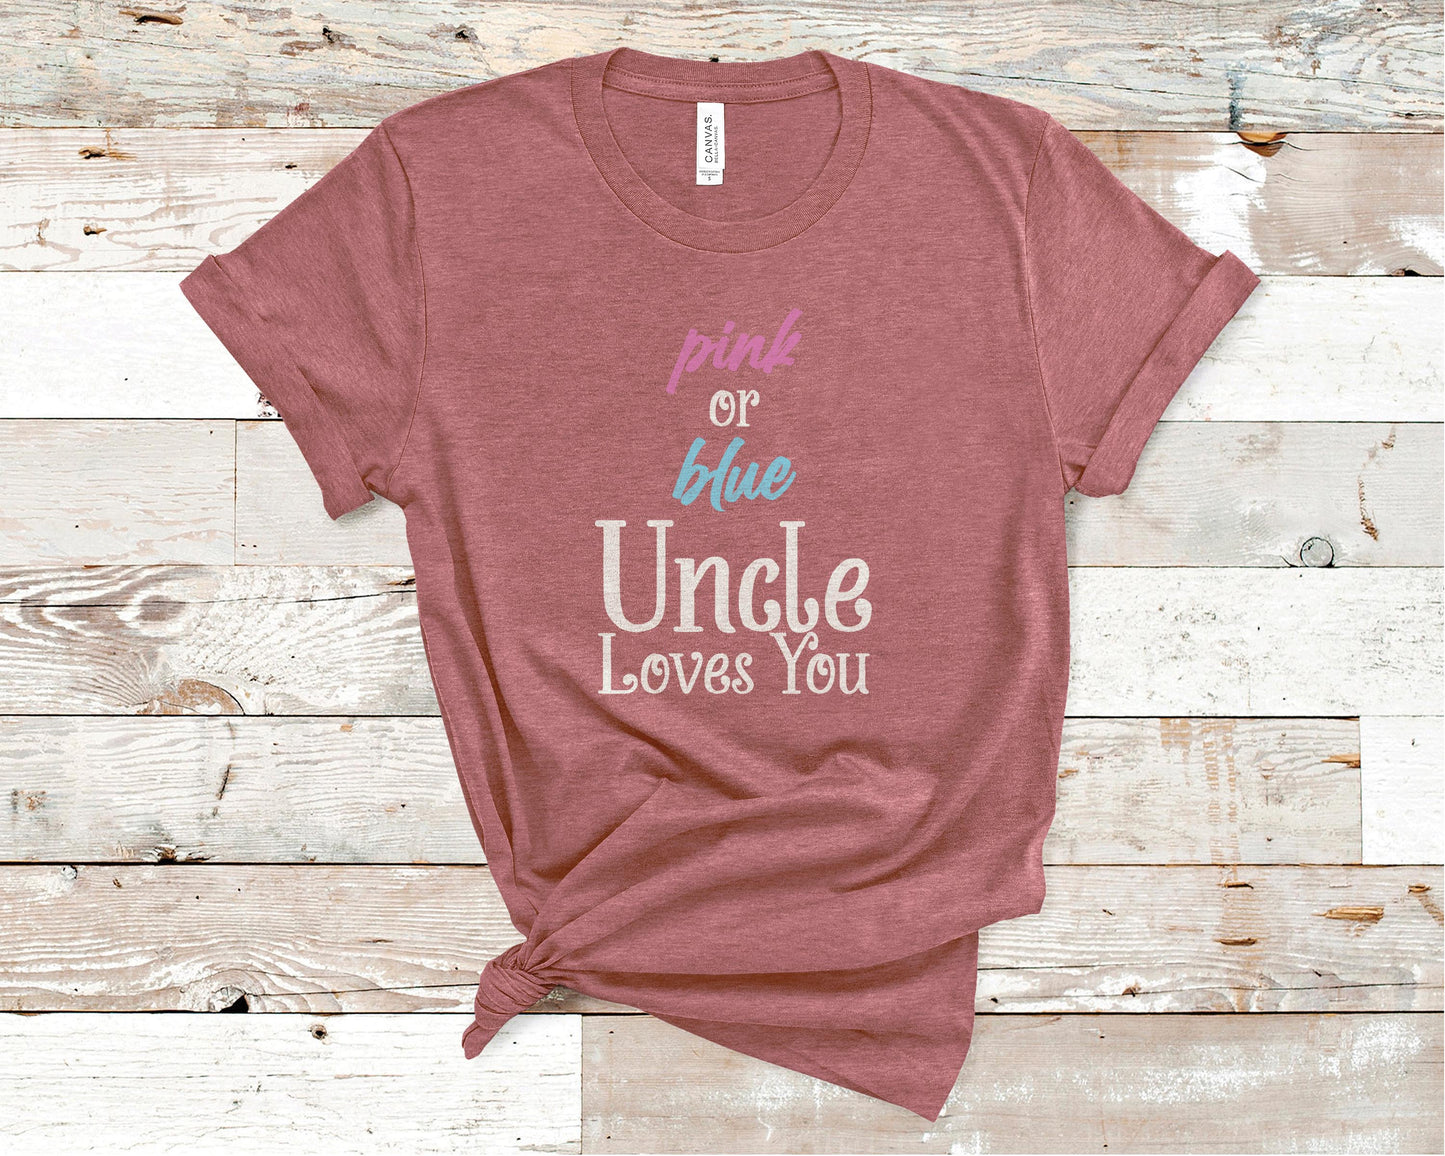 Pink or Blue Uncle Loves You - Pregnancy Announcement